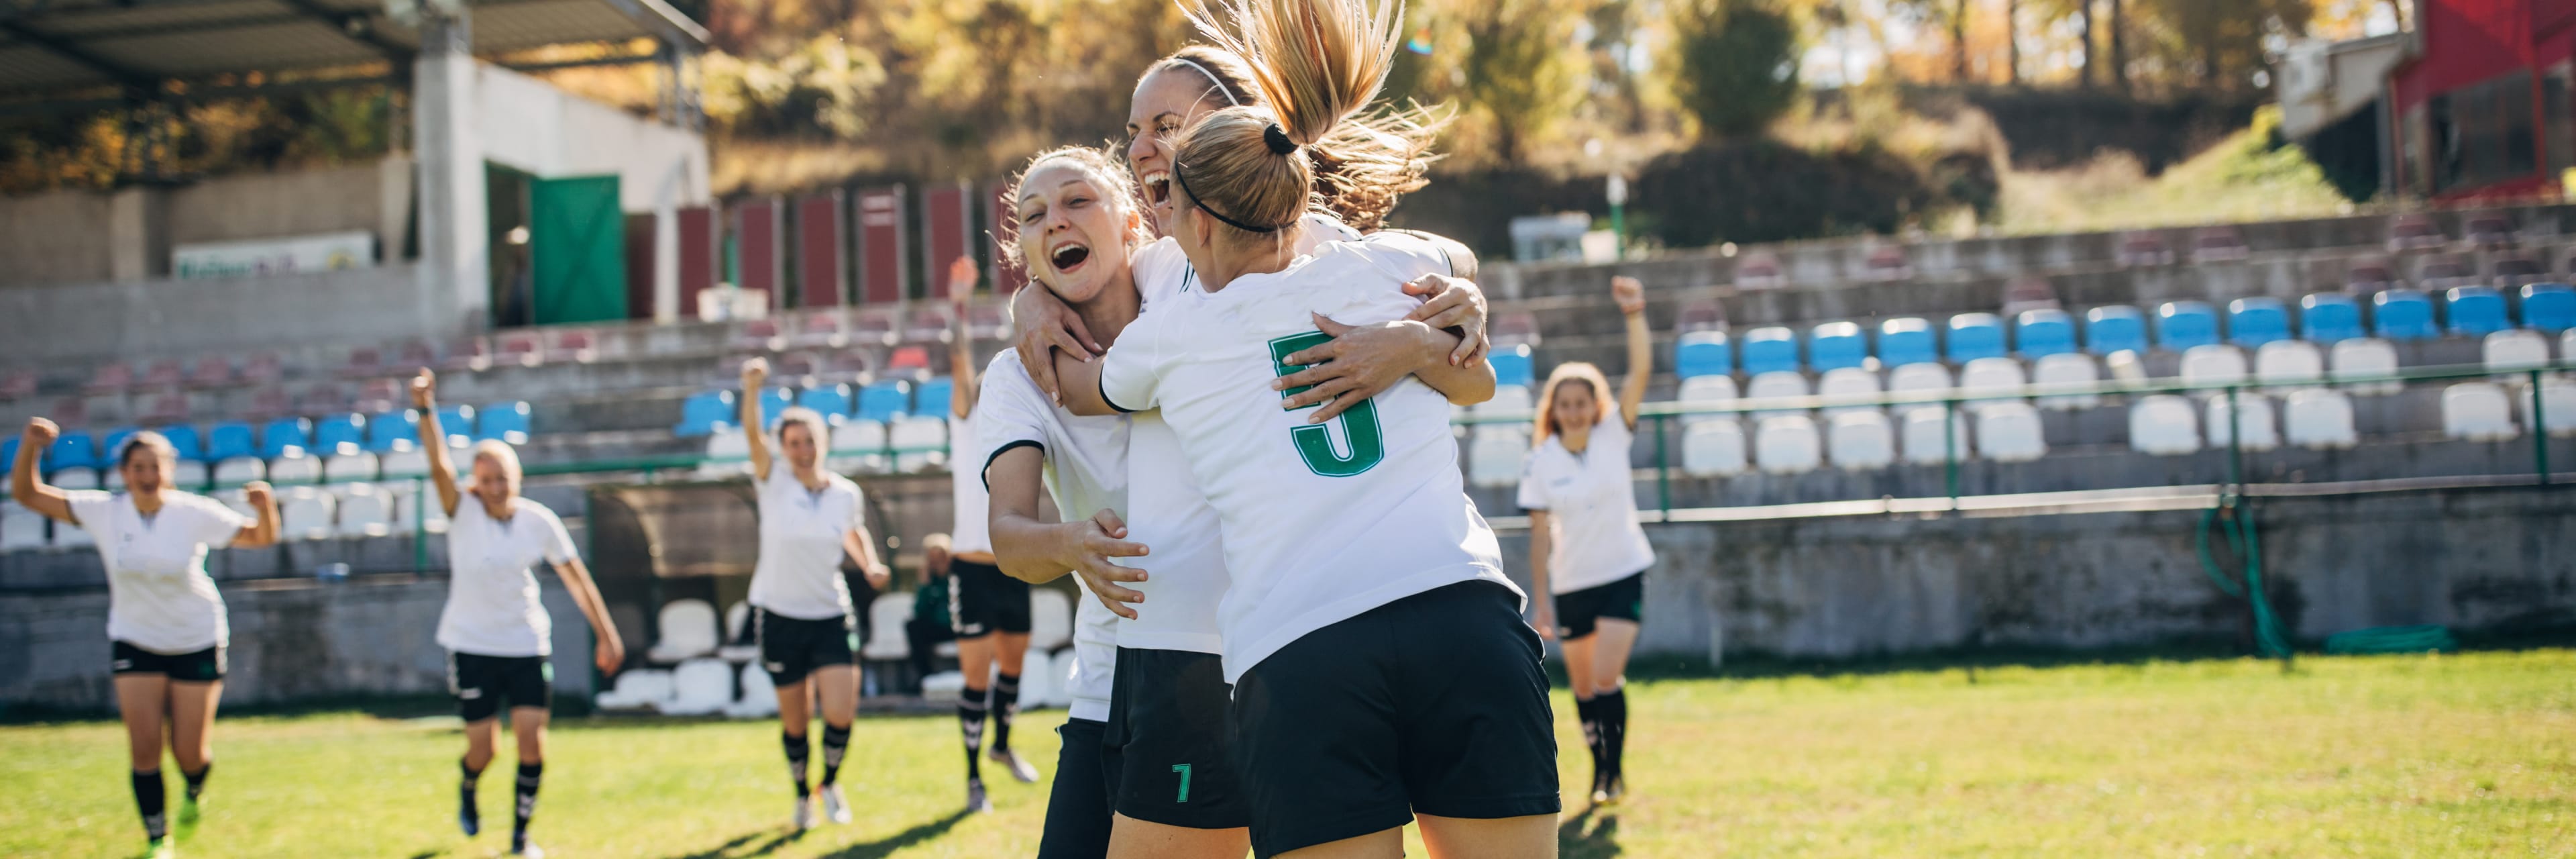 group of soccer girls celebrating together in a stadium